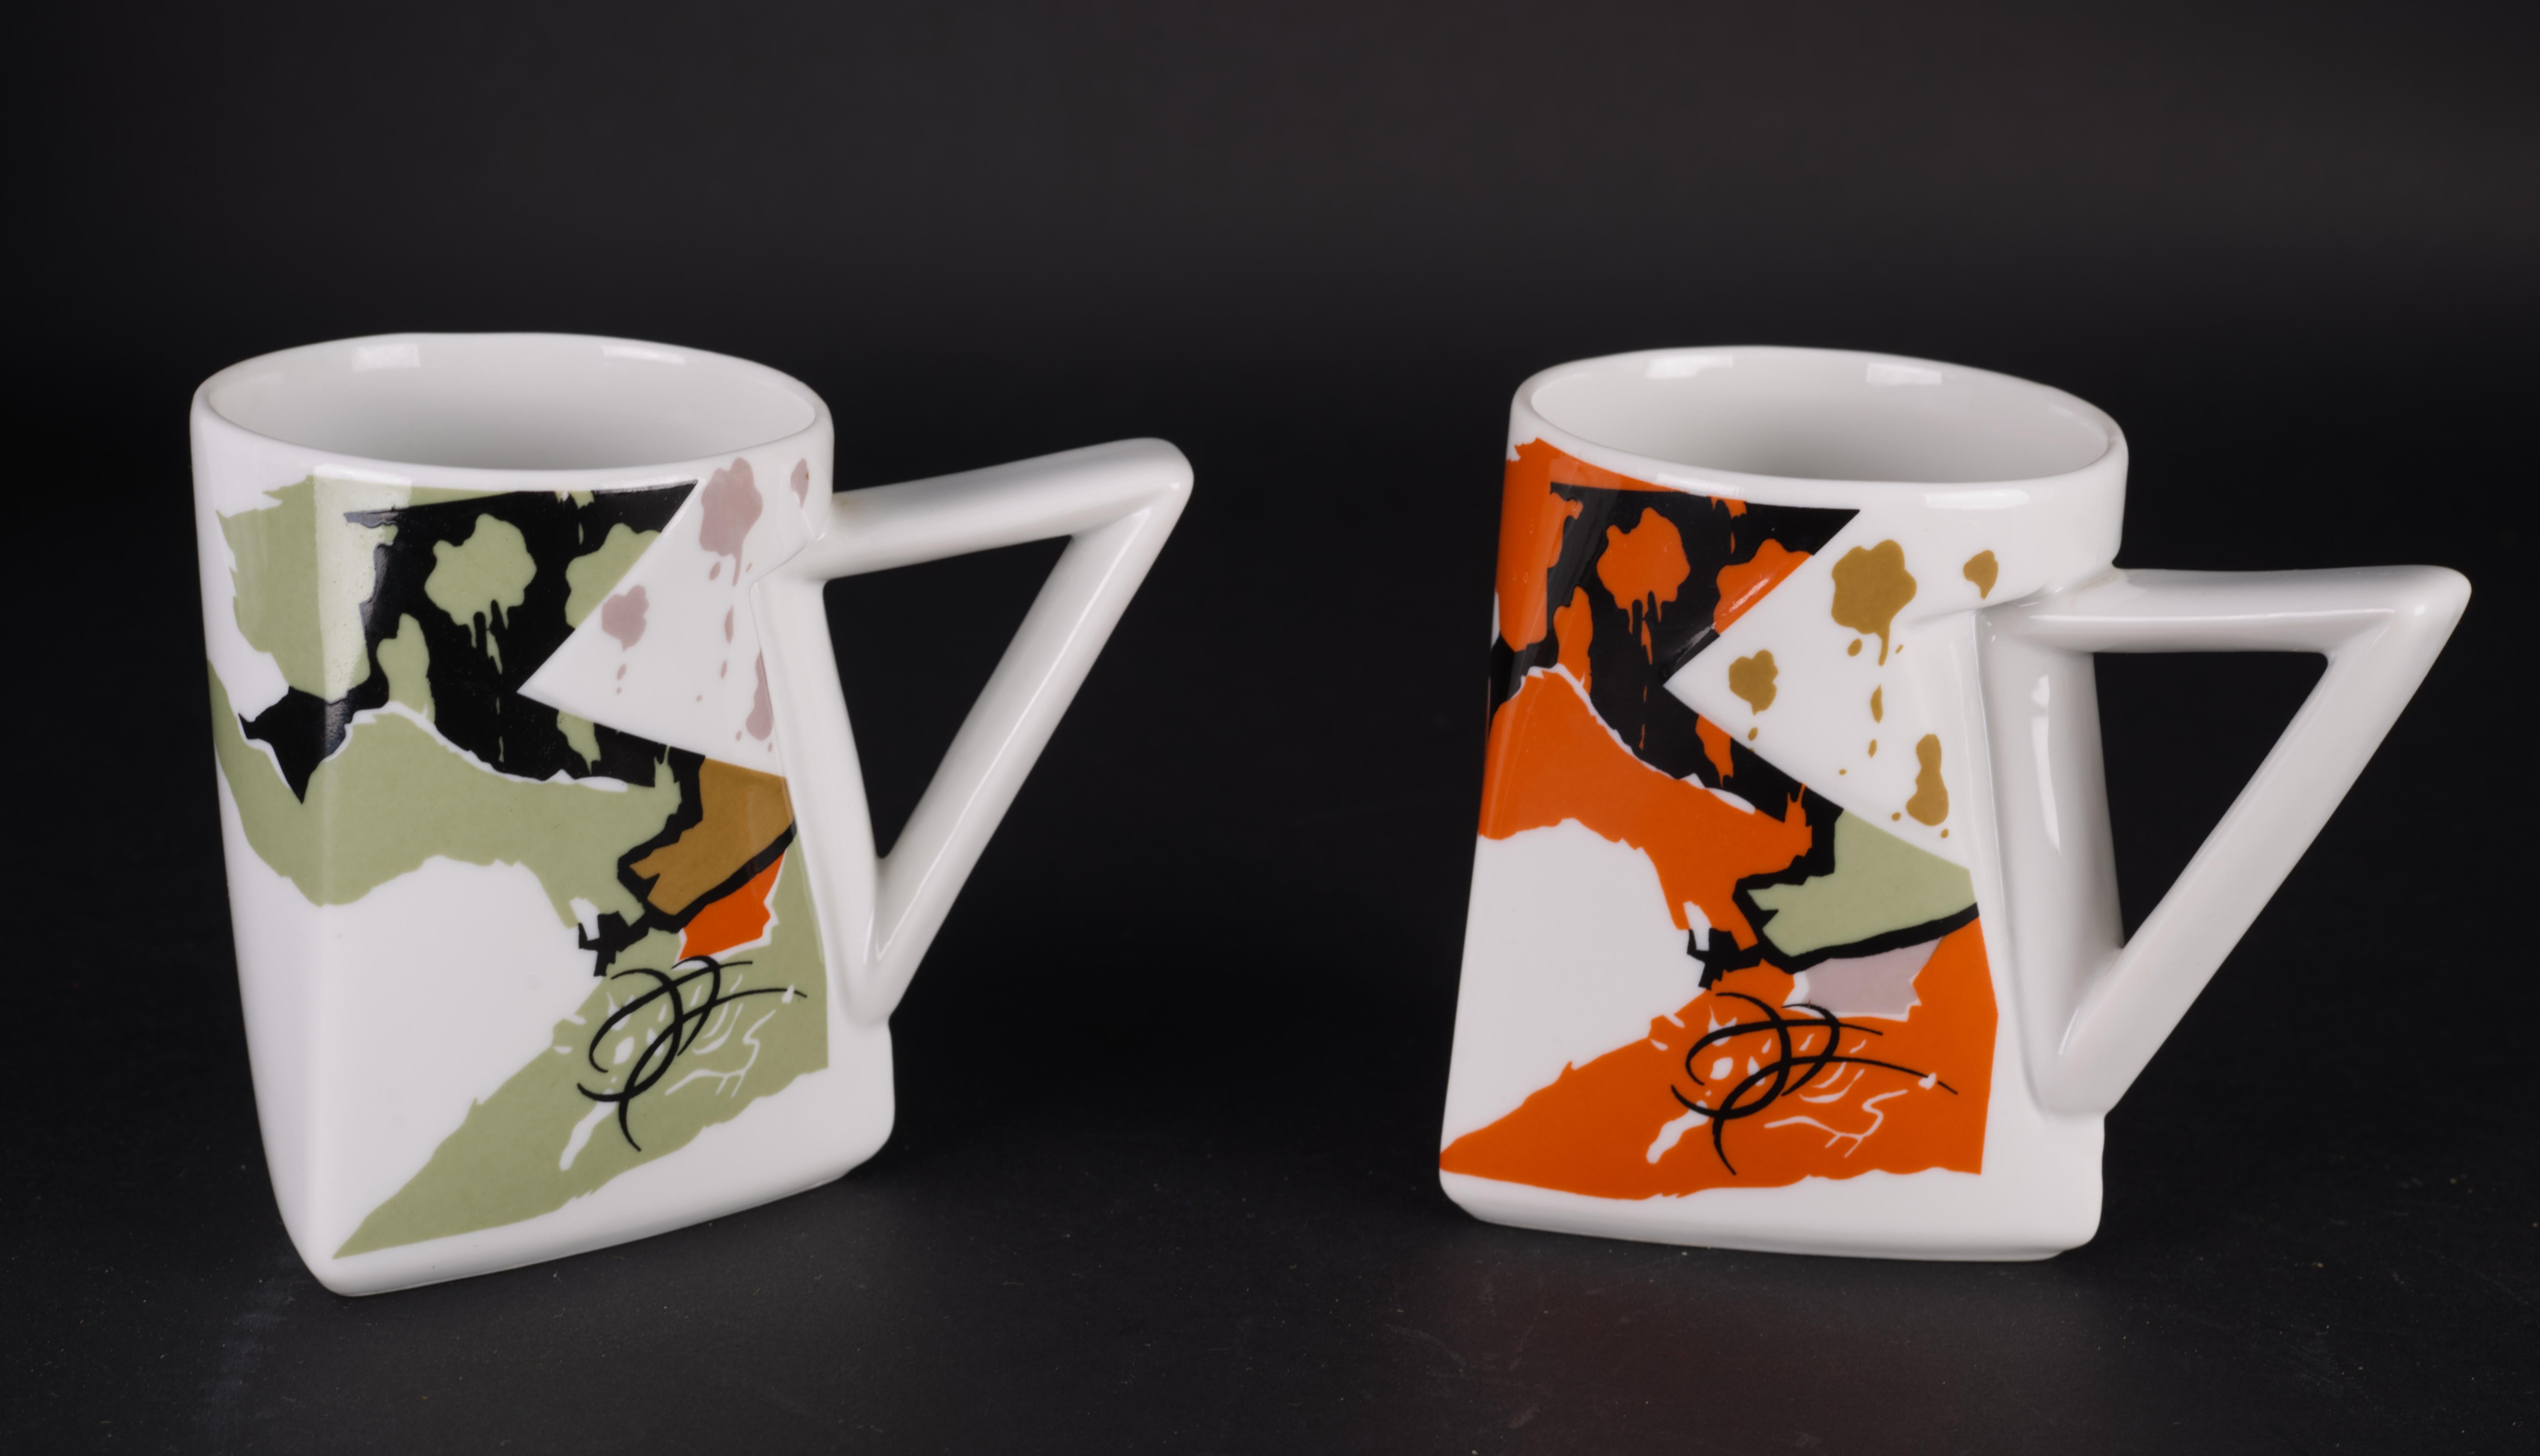 
Pair of mugs in Twilight pattern were designed by Kaneaki Fujimori for Kato Kogei Japan in 1980s. The mugs are decorated with colorful designs in black, olive, and orange that are clearly influenced by Memphis Milano style. Porcelain mugs were made